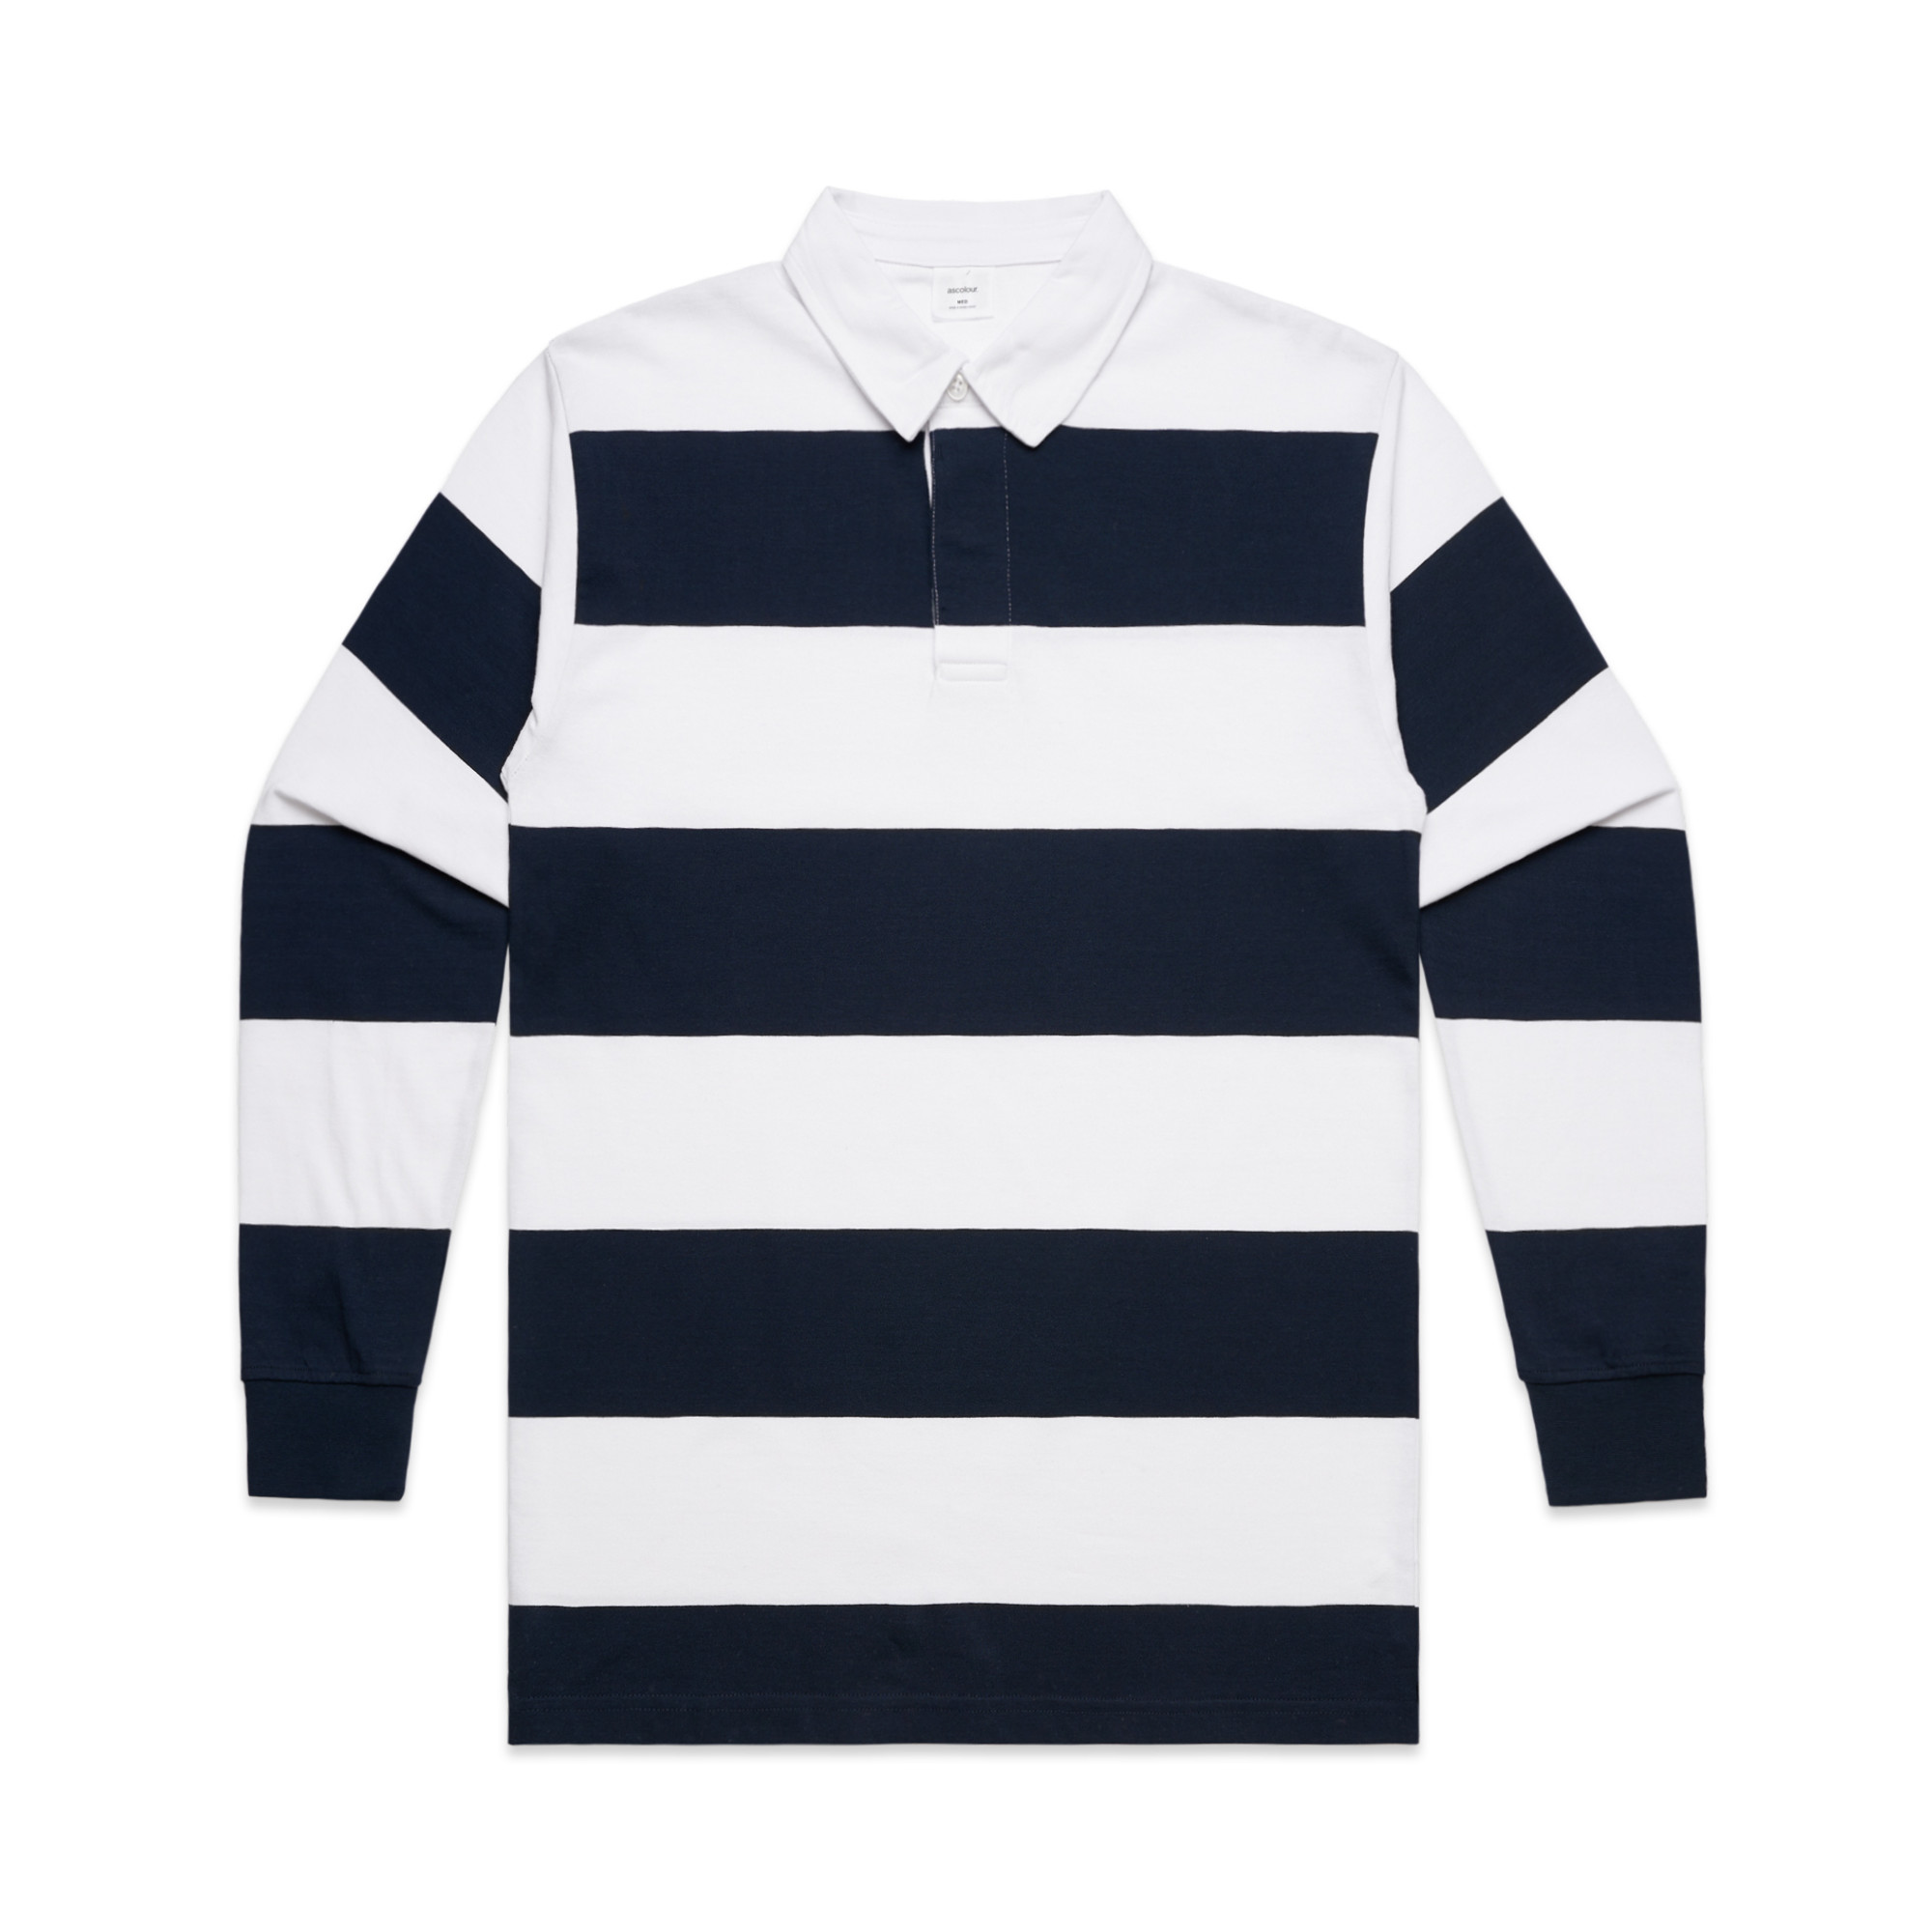 Mens Rugby Stripe Jersey - 5416 - AS Colour US